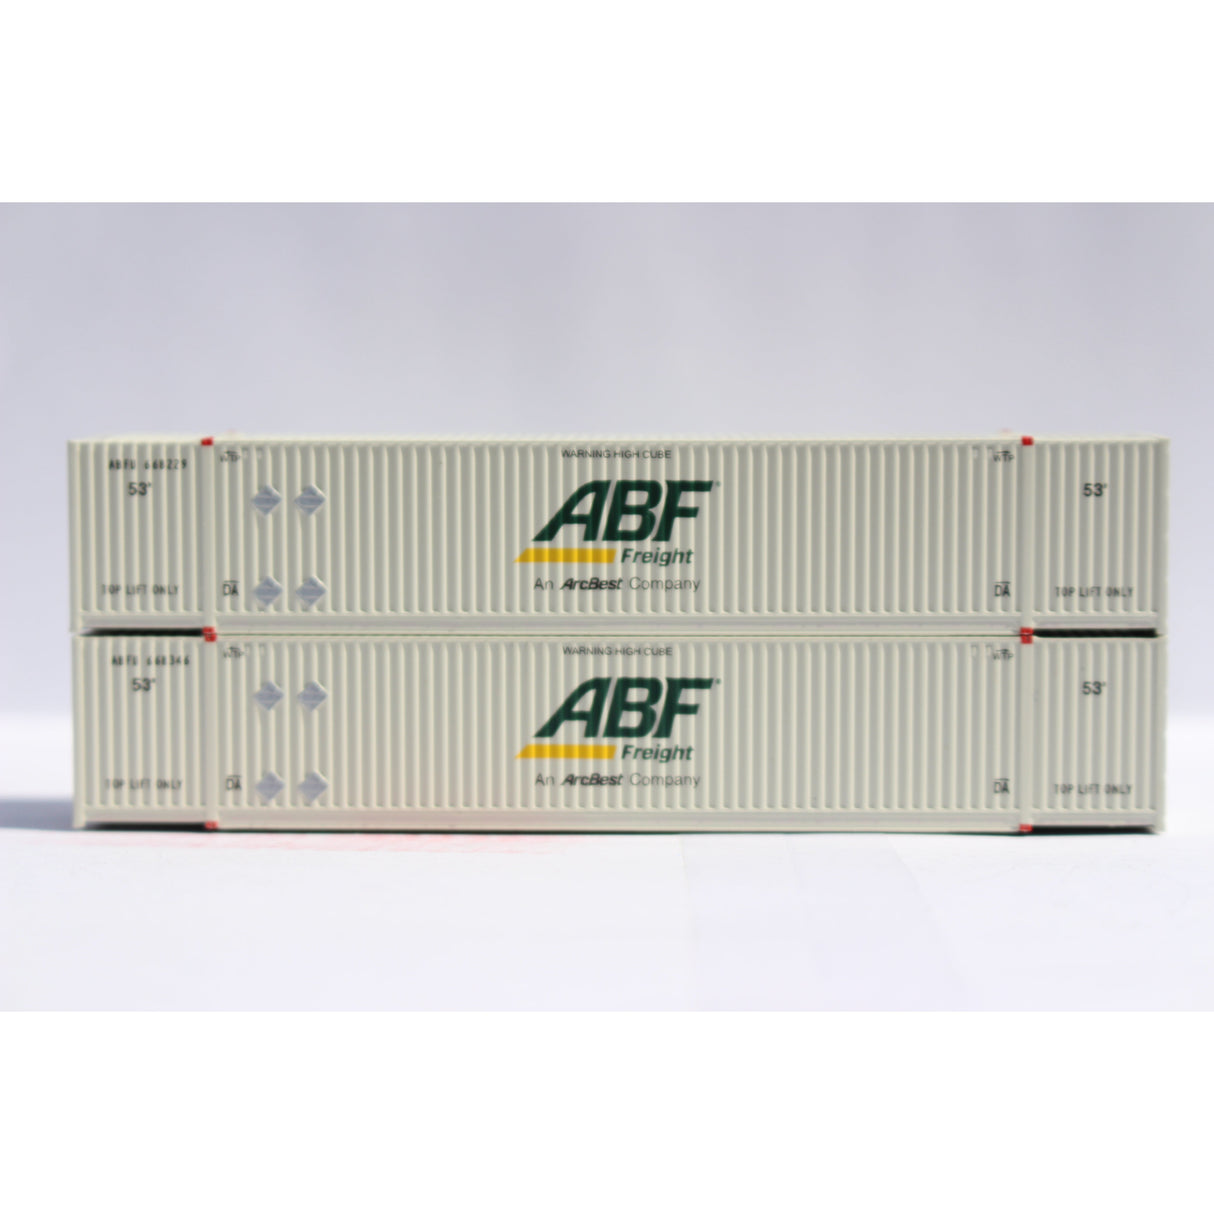 Jacksonville Terminal Company N ABF FREIGHT 53' HIGH CUBE 8-55-8 Set #1 corrugated contain